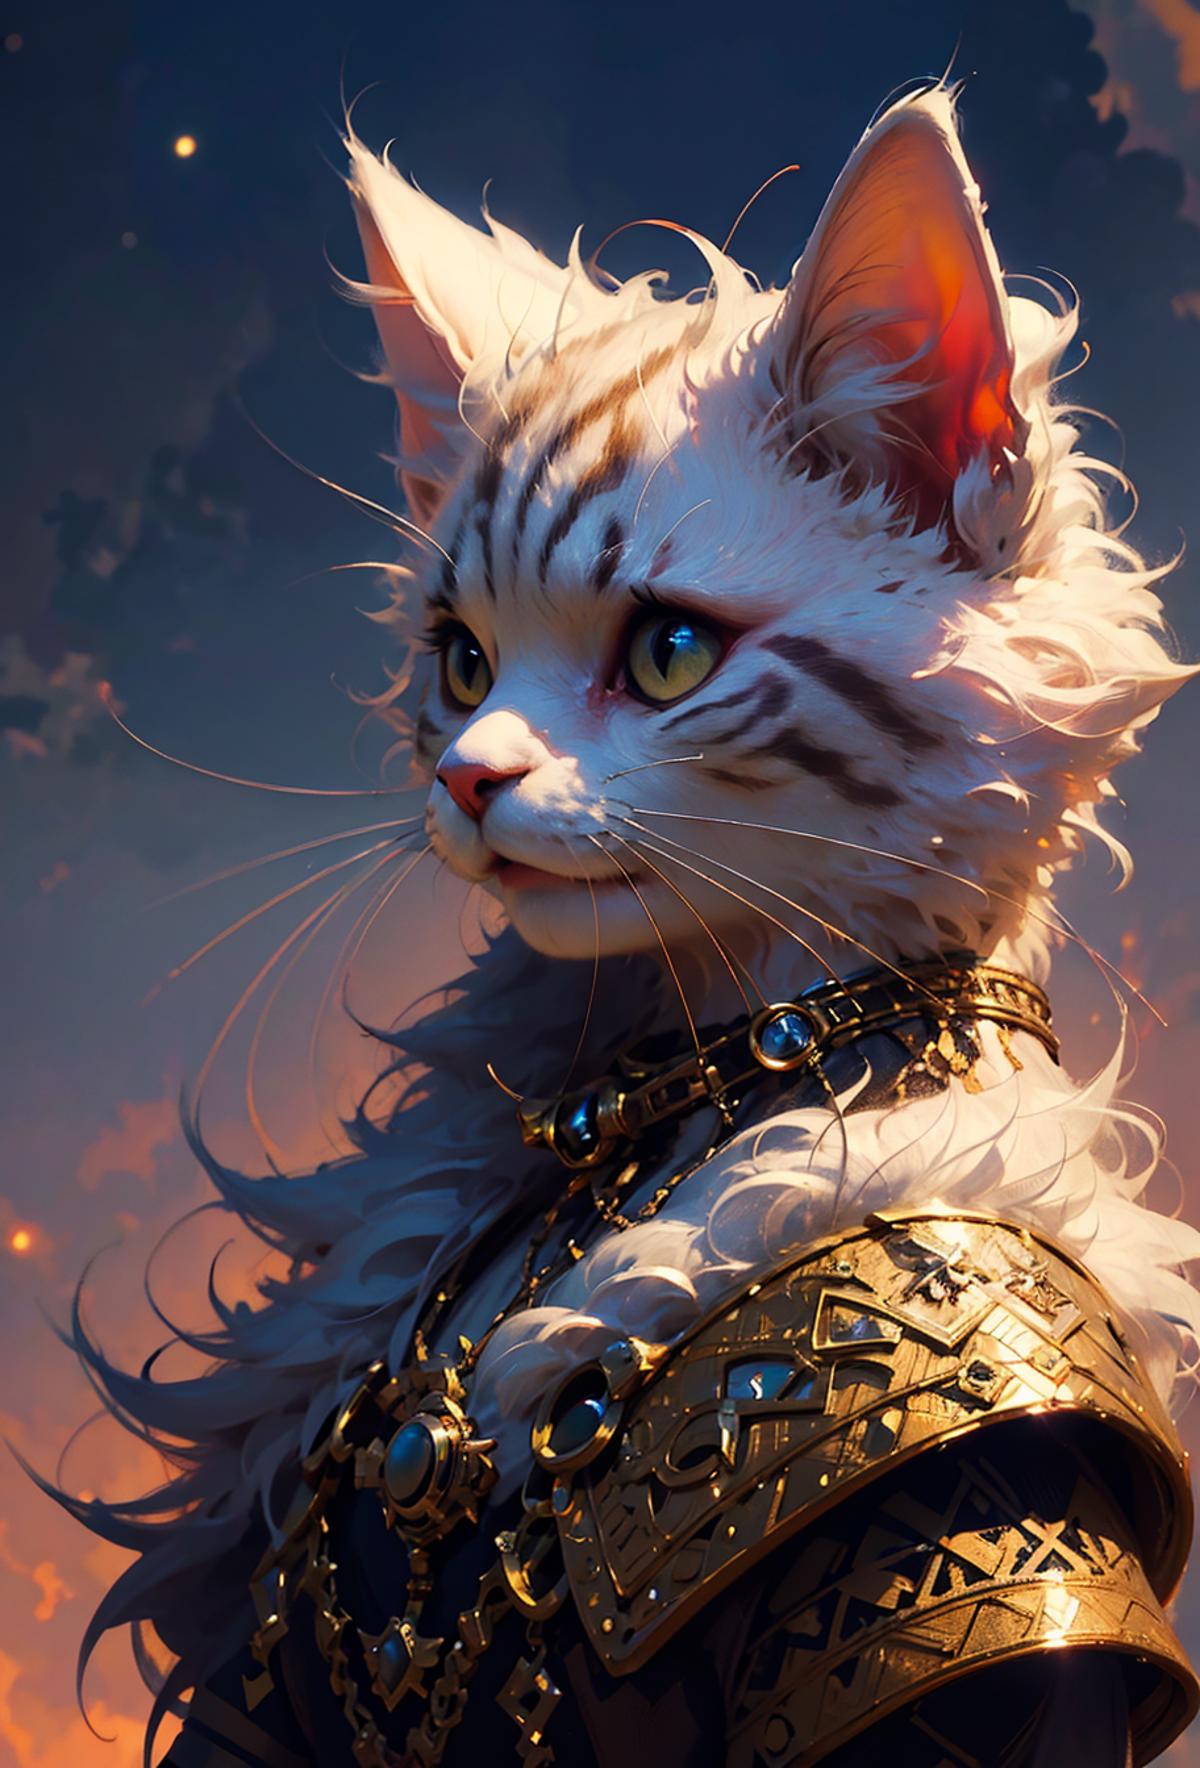 A white cat with long hair and a gold chain around its neck.